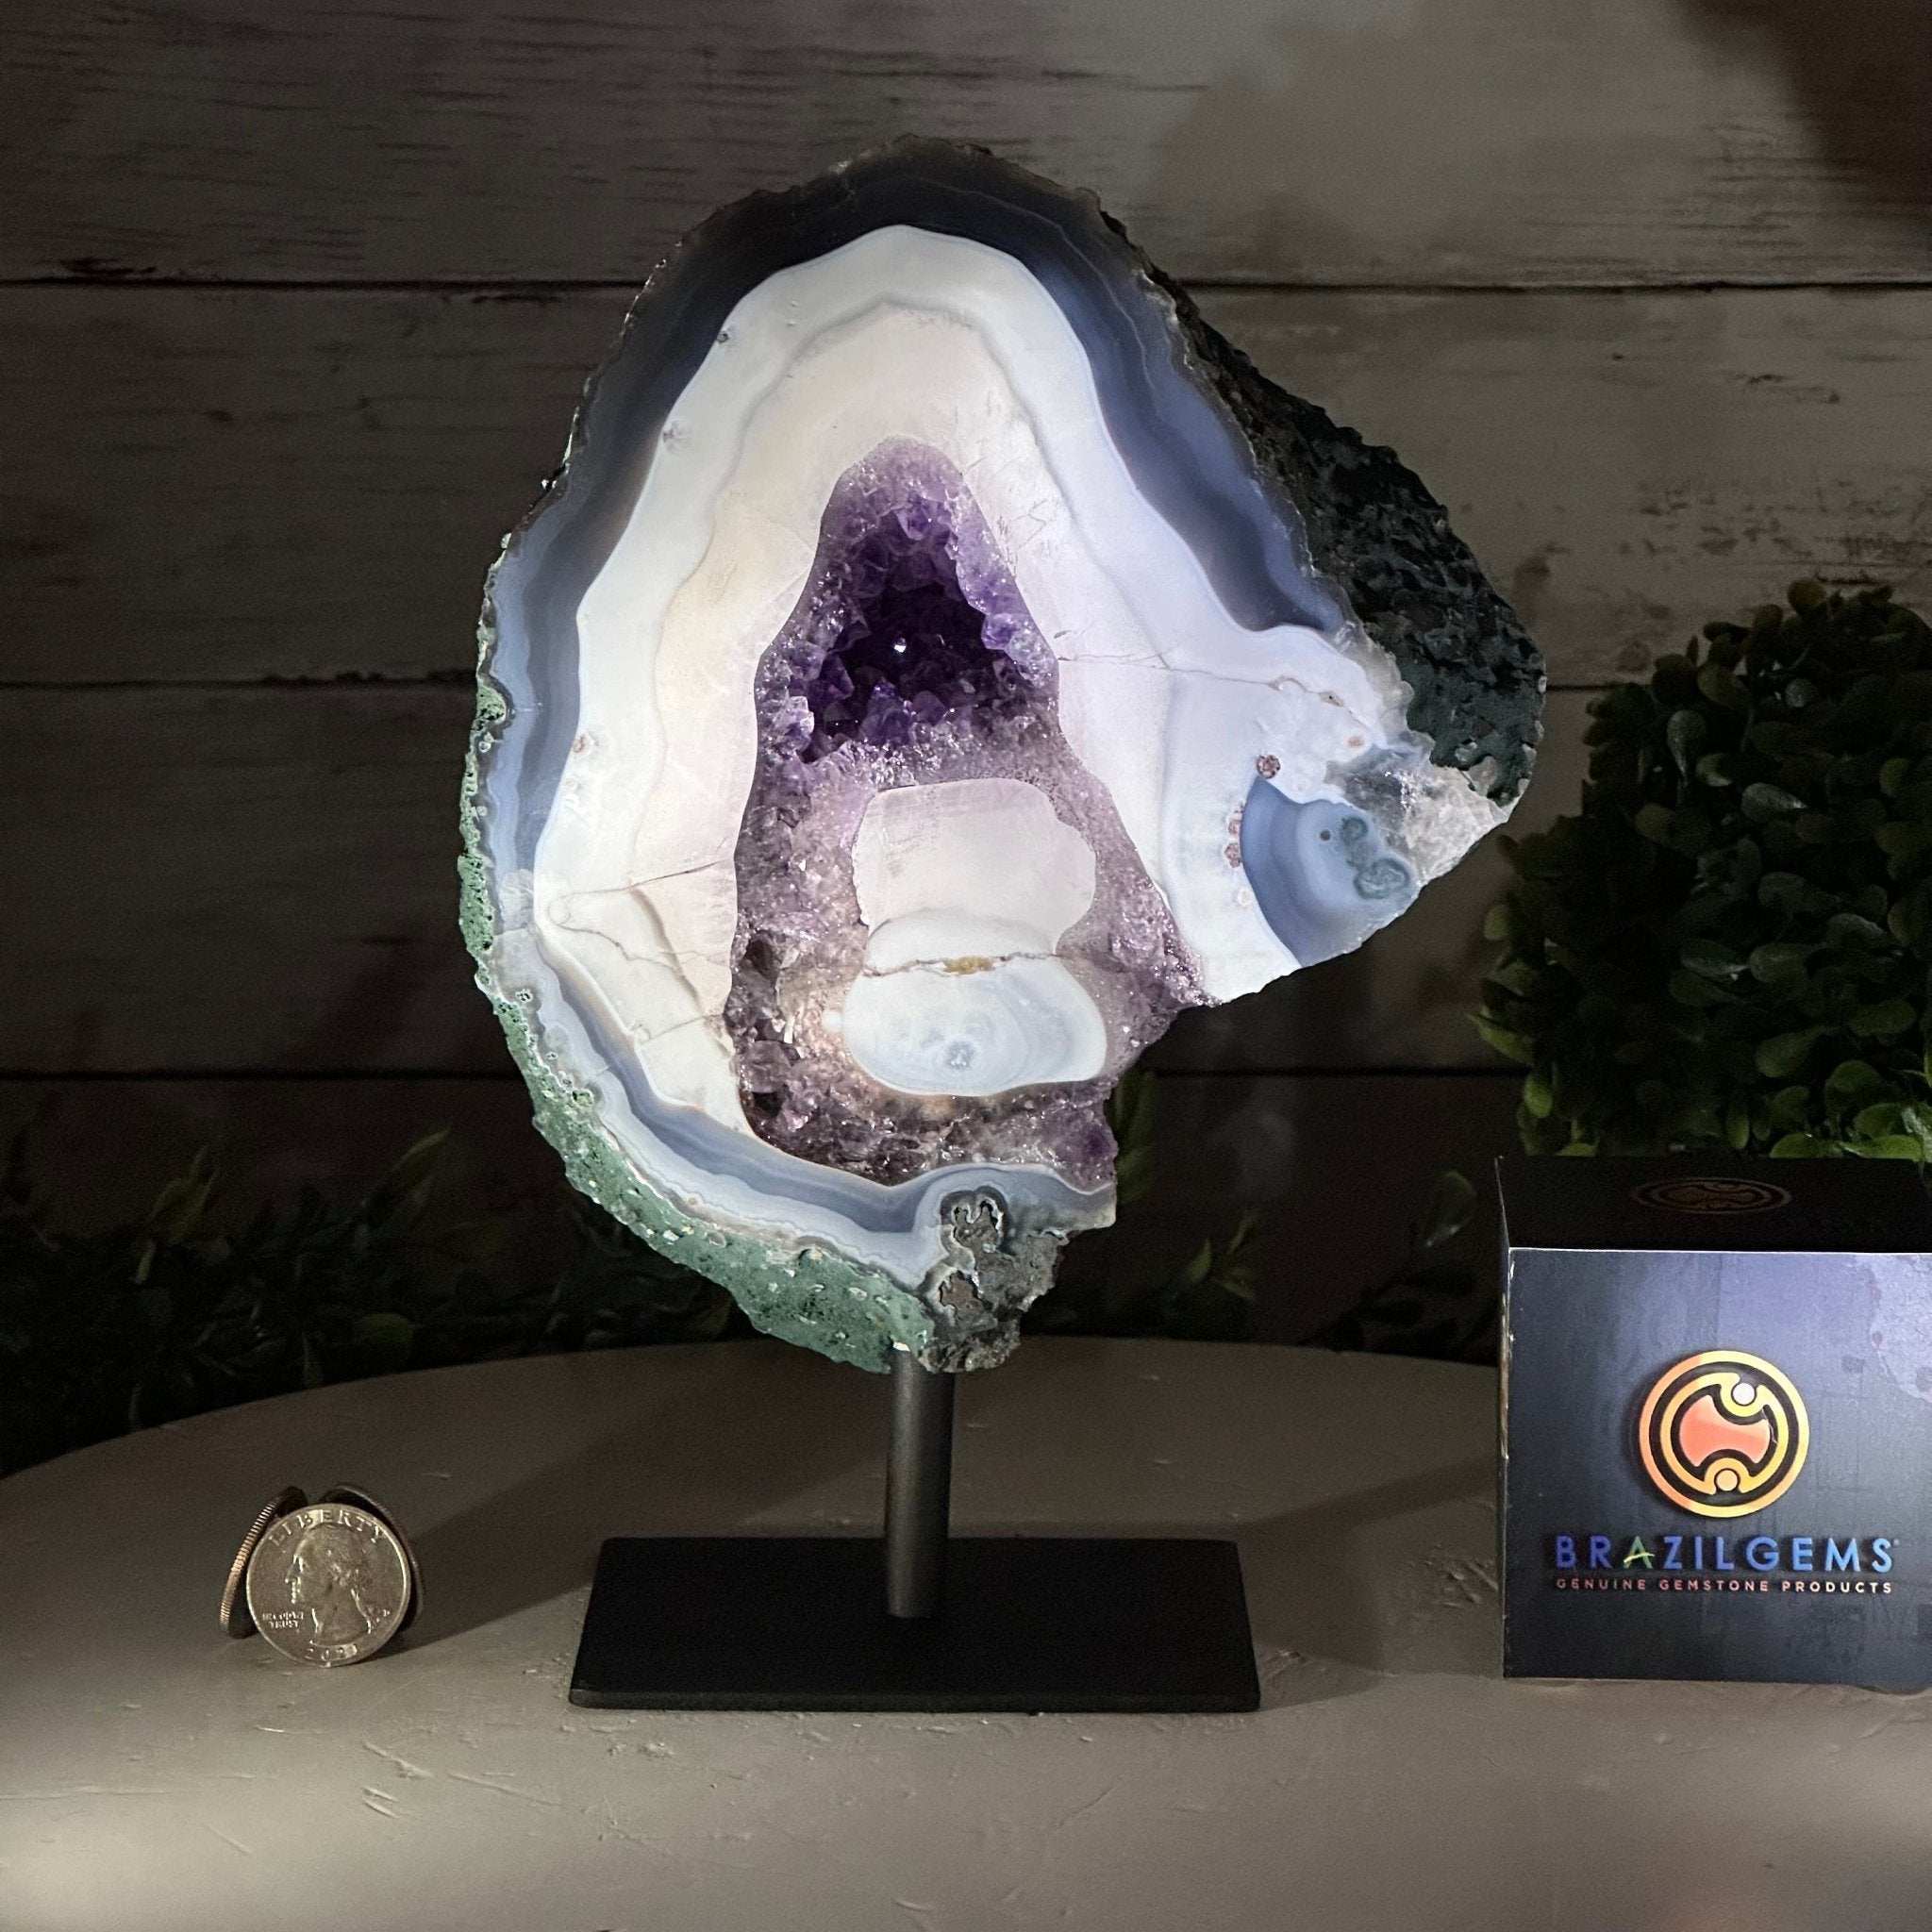 Amethyst Cluster on a Metal Base, 5.2 lbs & 8.8" Tall #5491-0180 - Brazil GemsBrazil GemsAmethyst Cluster on a Metal Base, 5.2 lbs & 8.8" Tall #5491-0180Clusters on Fixed Bases5491-0180